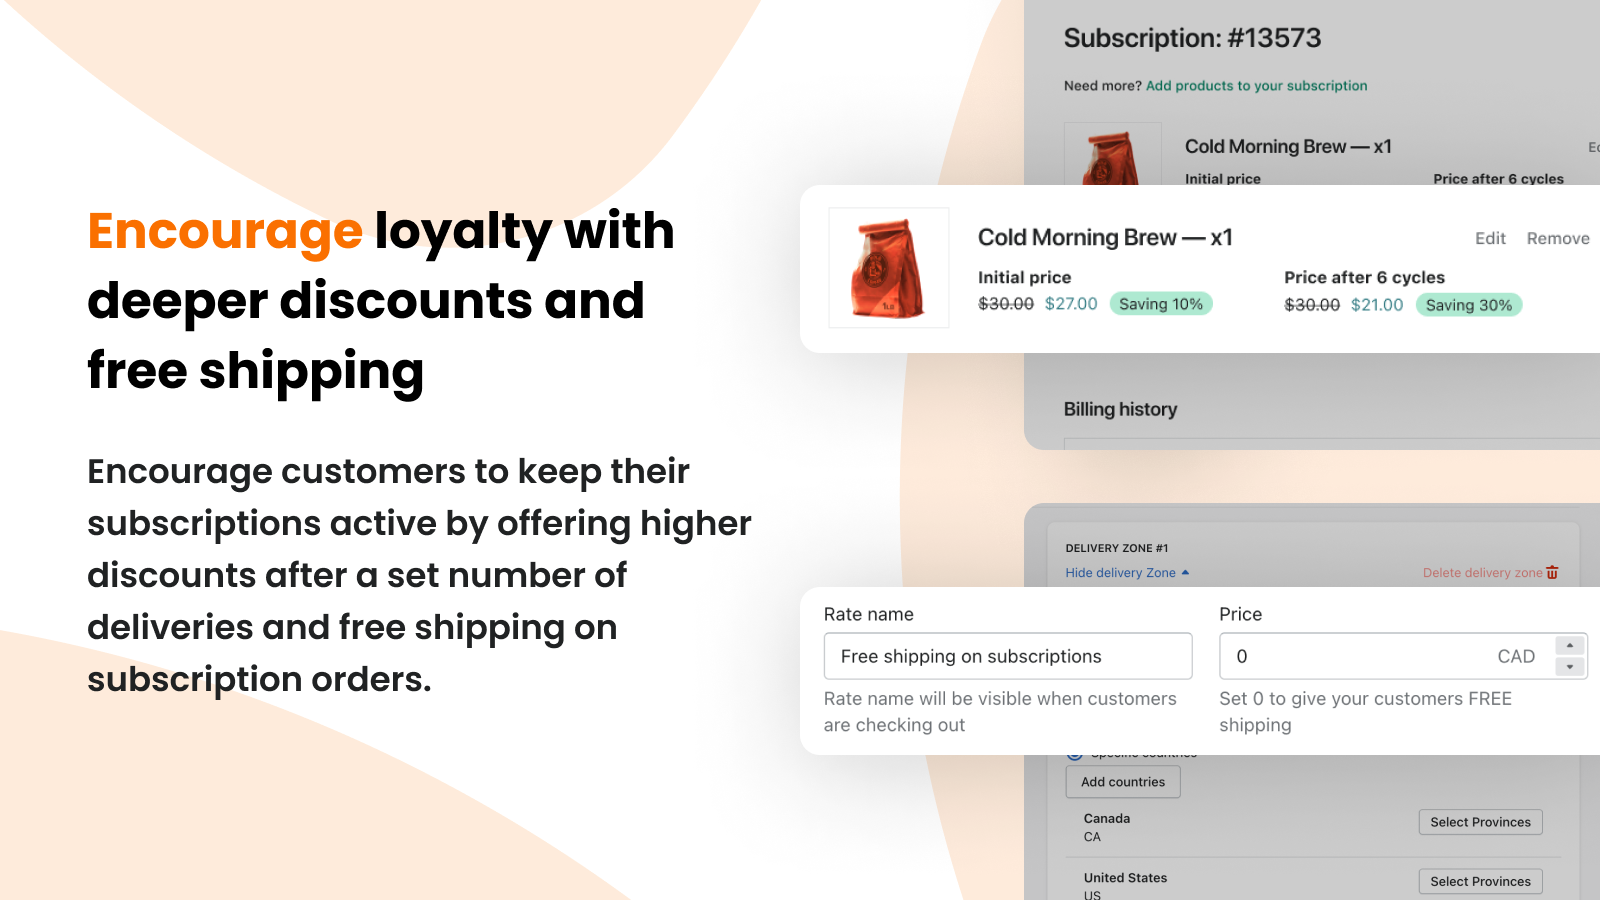 Encourage loyalty with discounts and free shipping